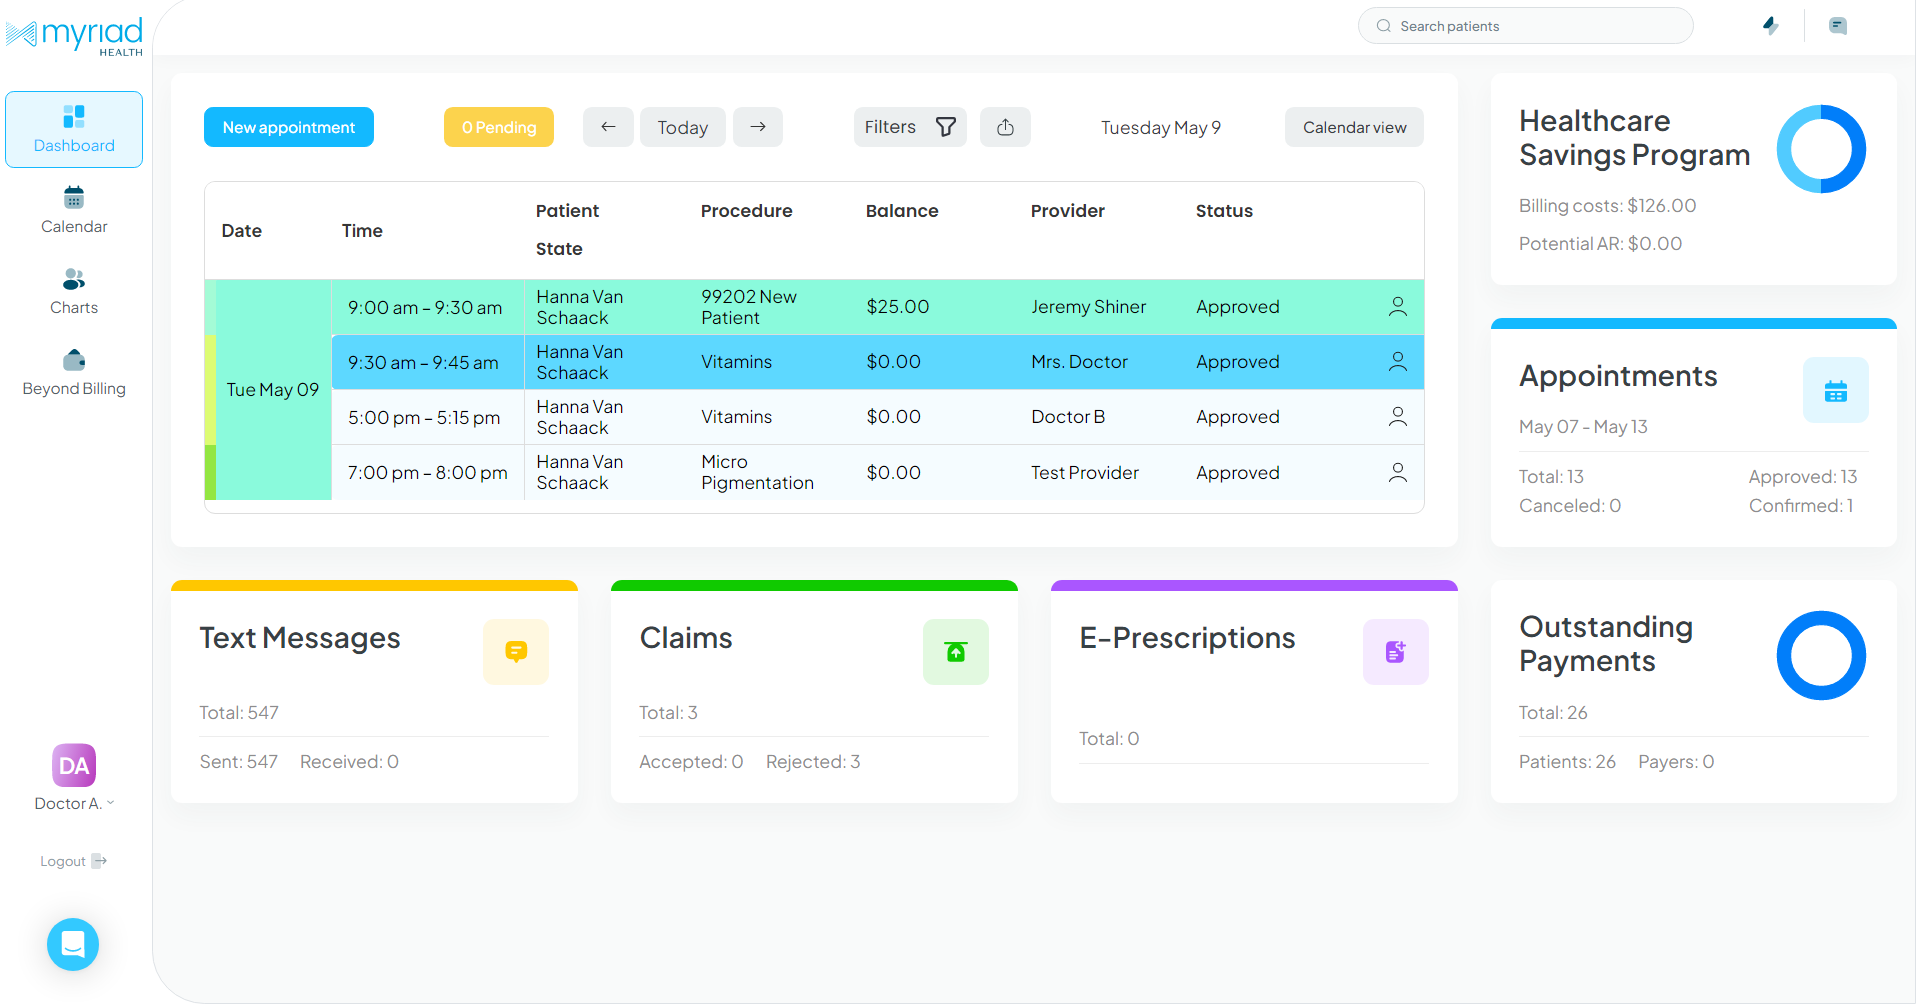 Myriad Health's streamlined dashboard offers an overview of the daily agenda and software usage.